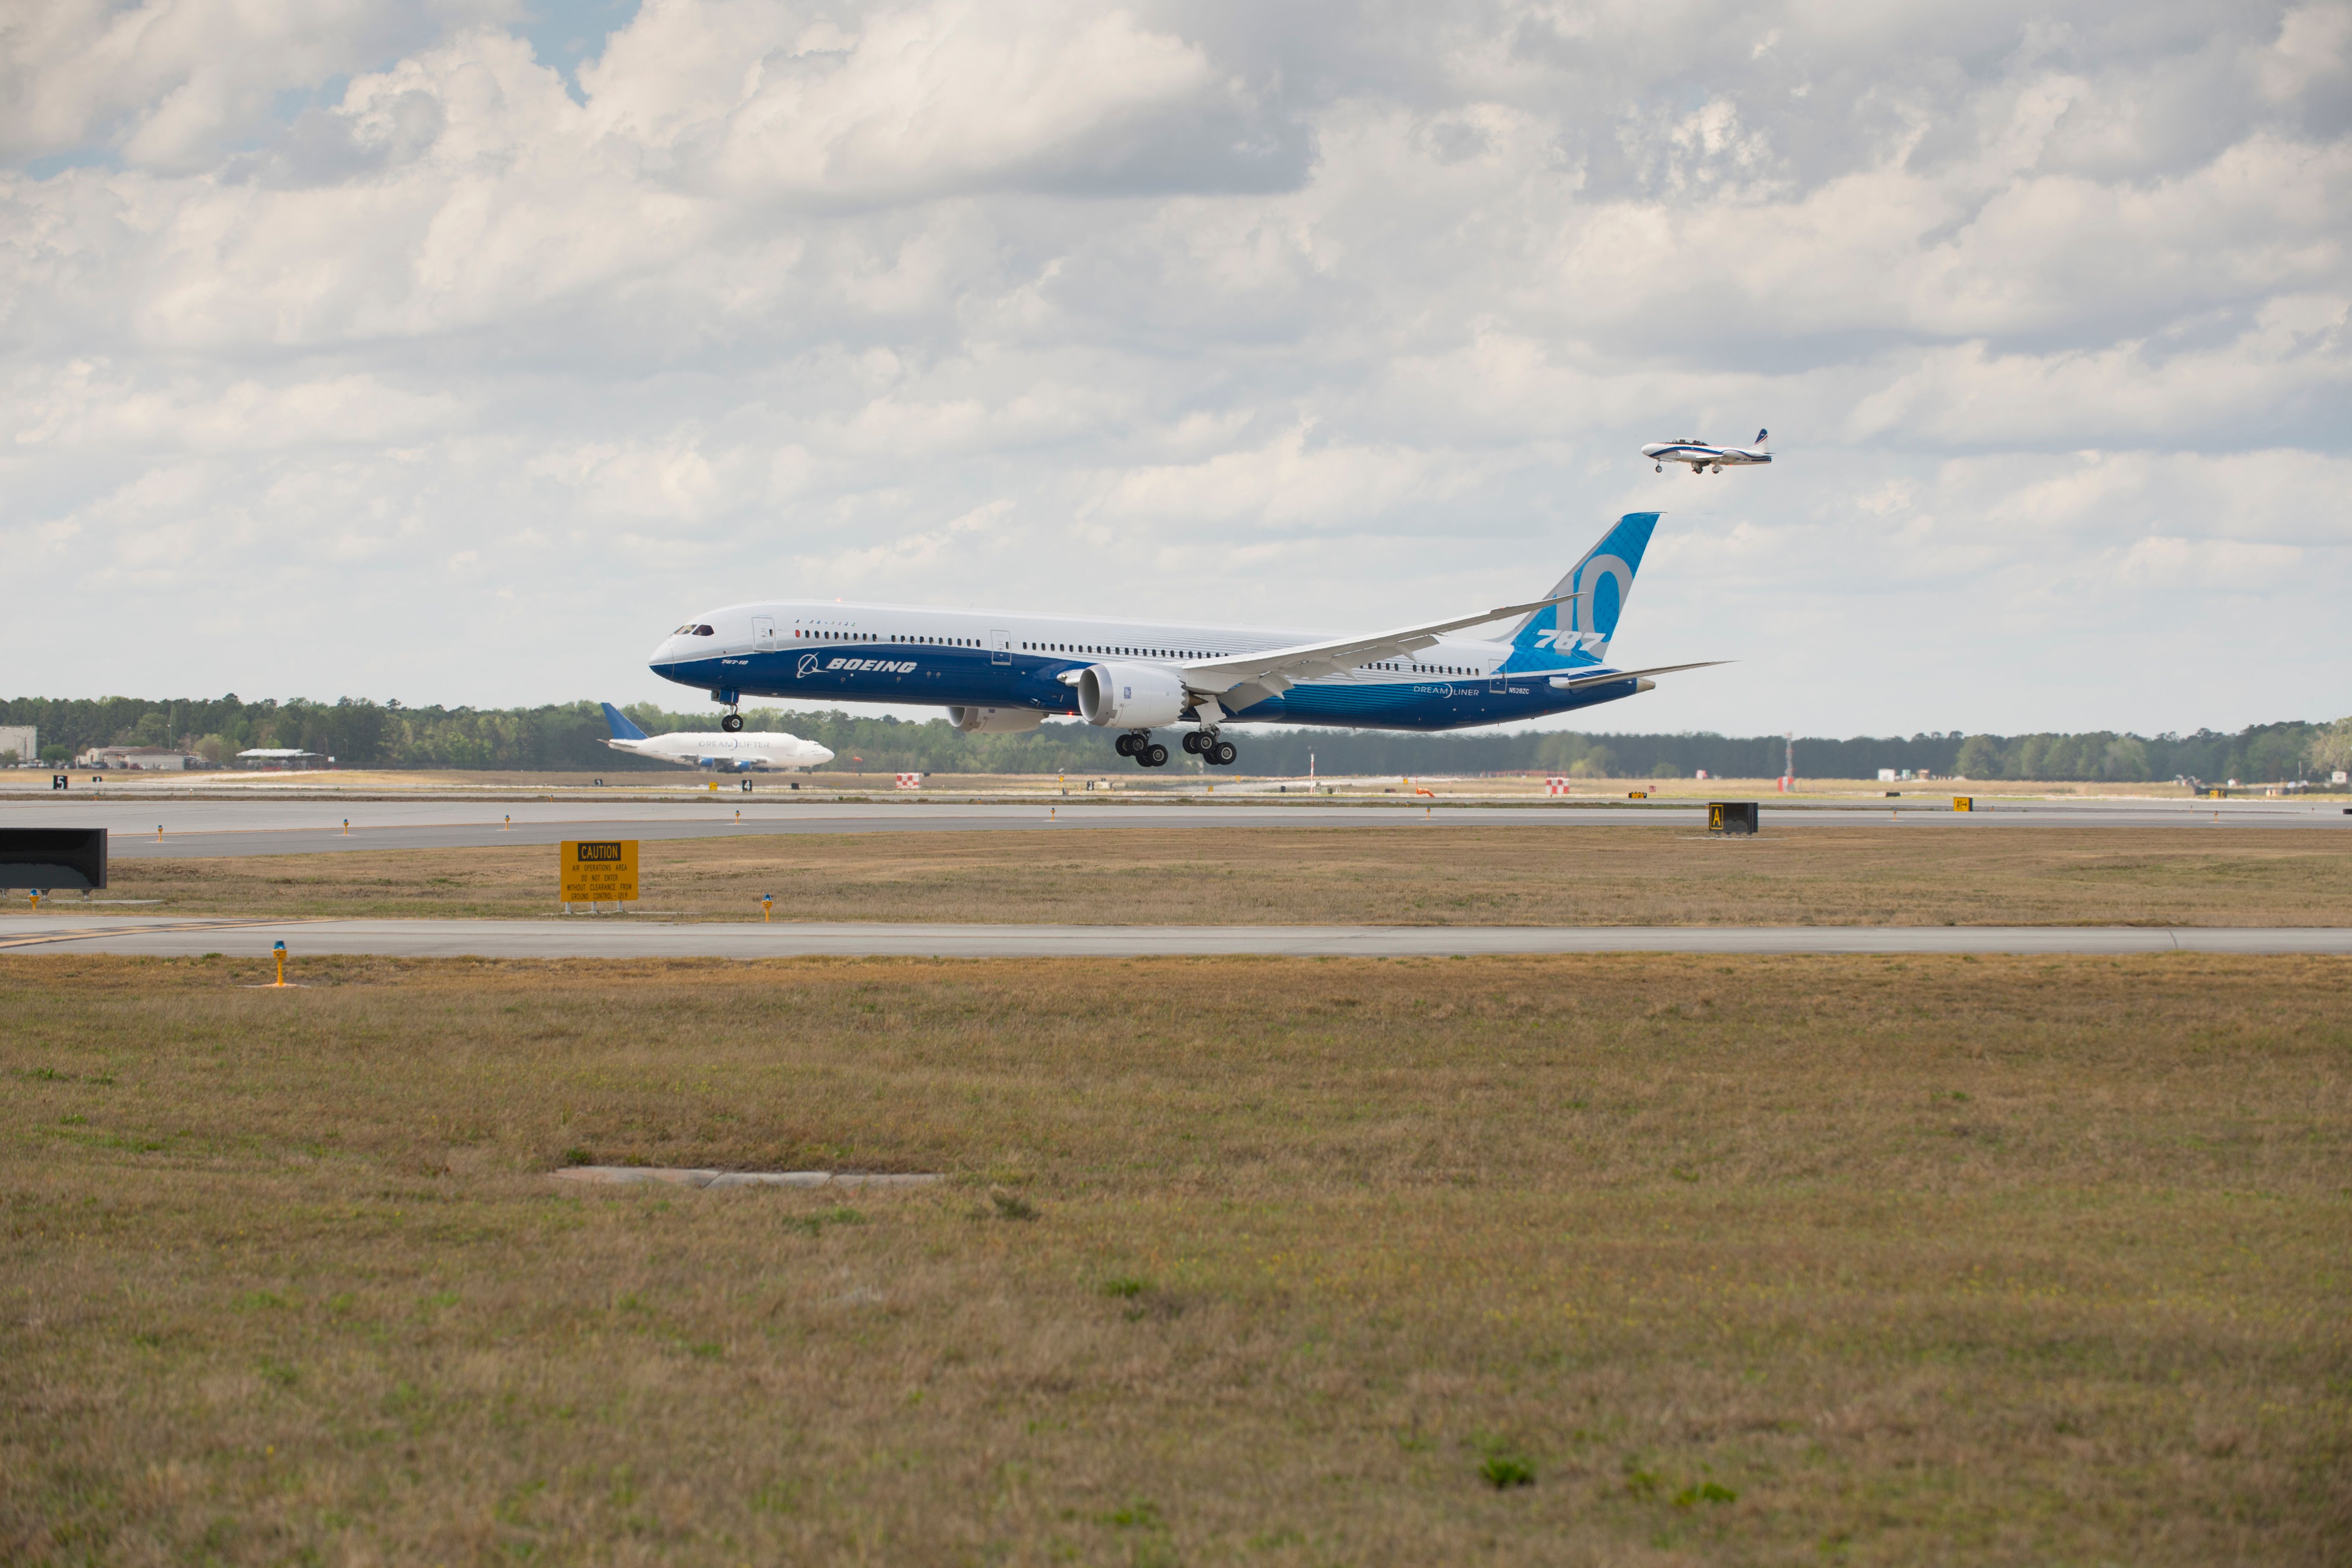 A Boeing 787-10 about to land on a runway.